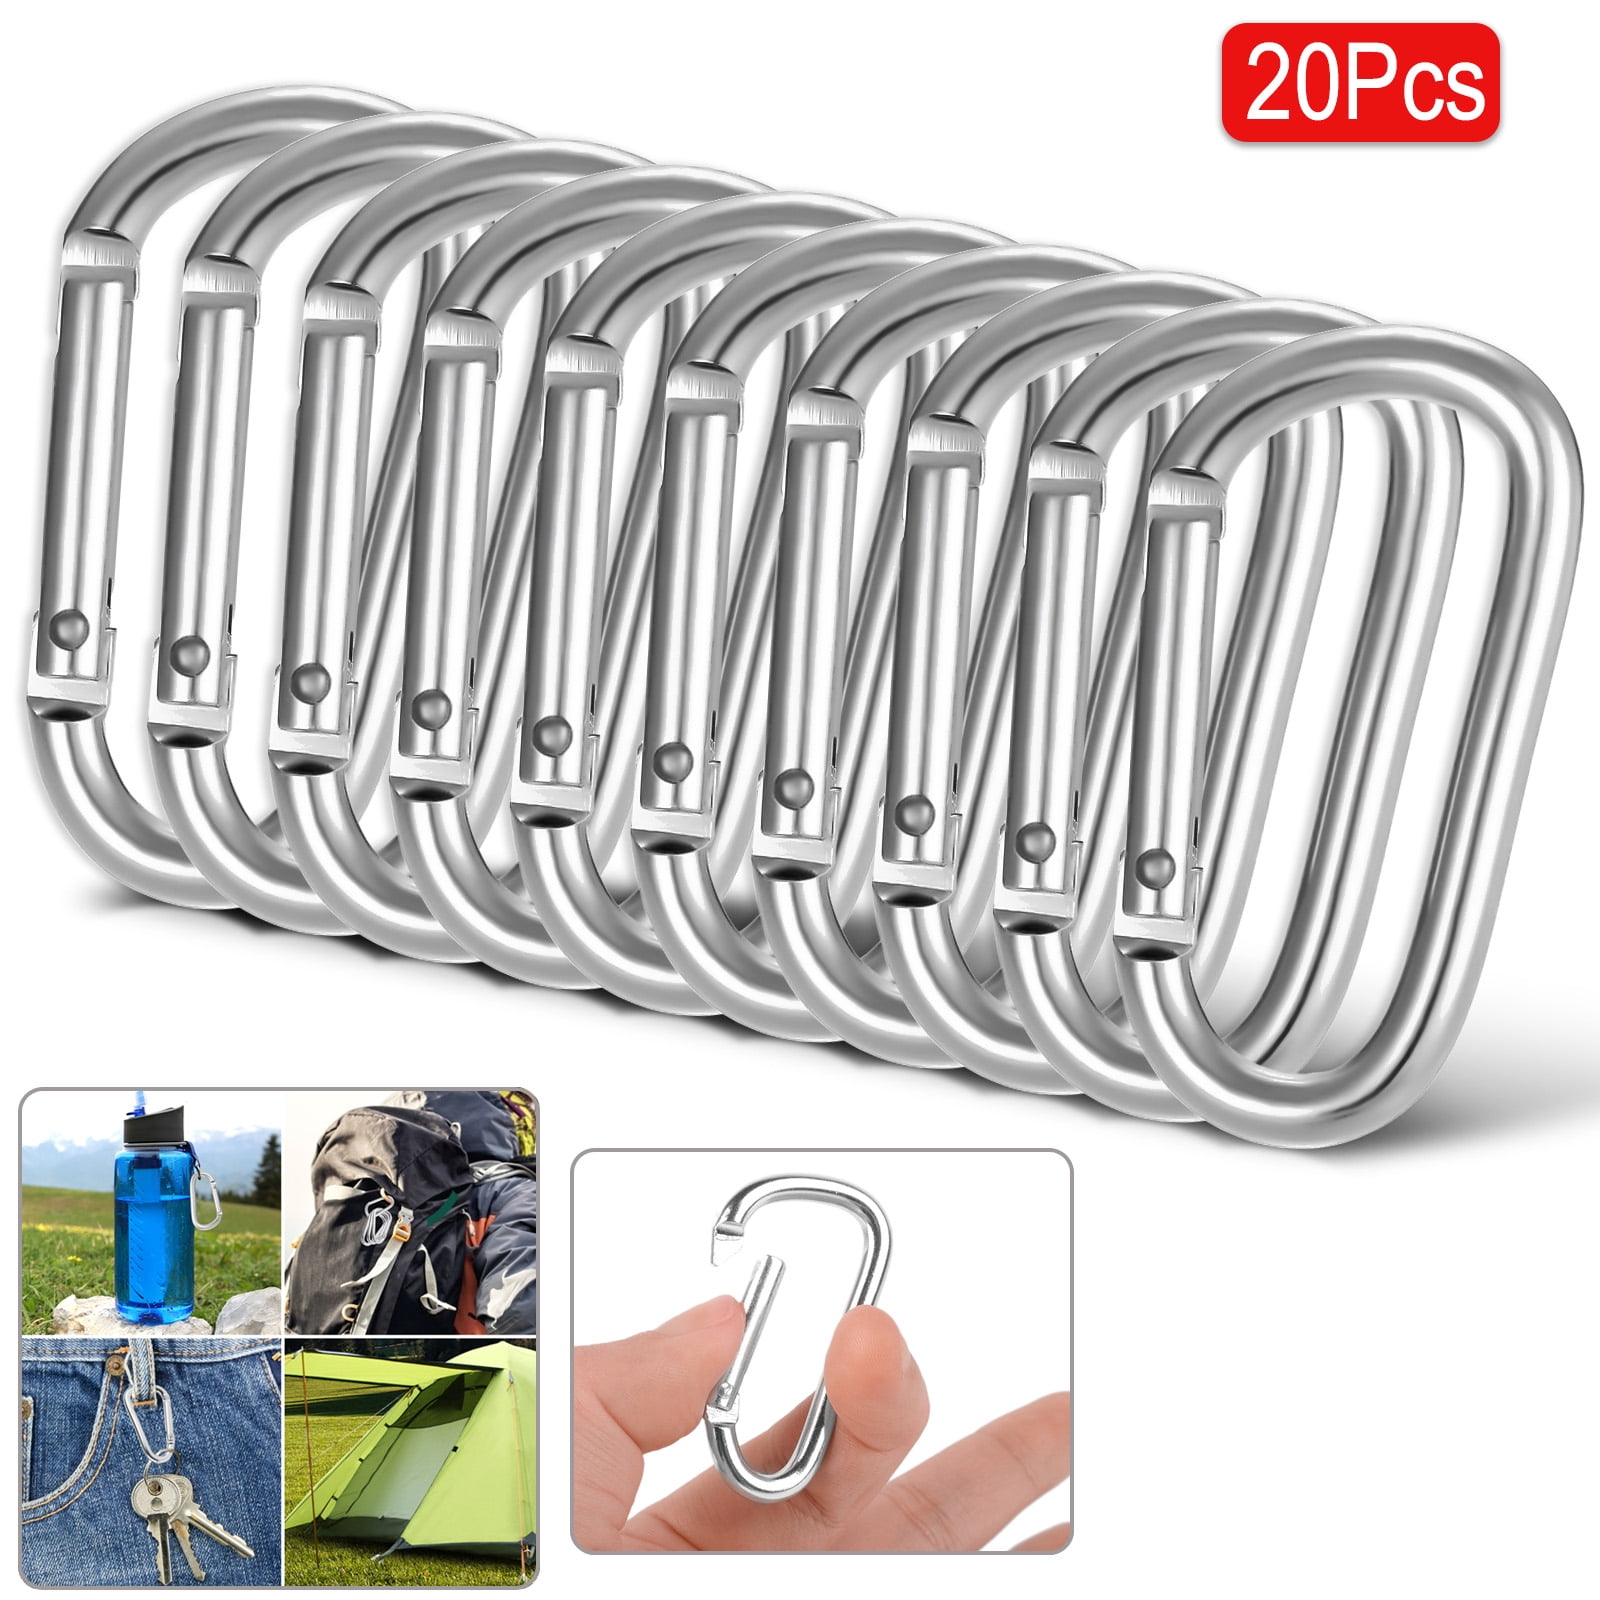 20 Pack 2” Black & Silver Aluminum Carabiner Clips New Free ship! 